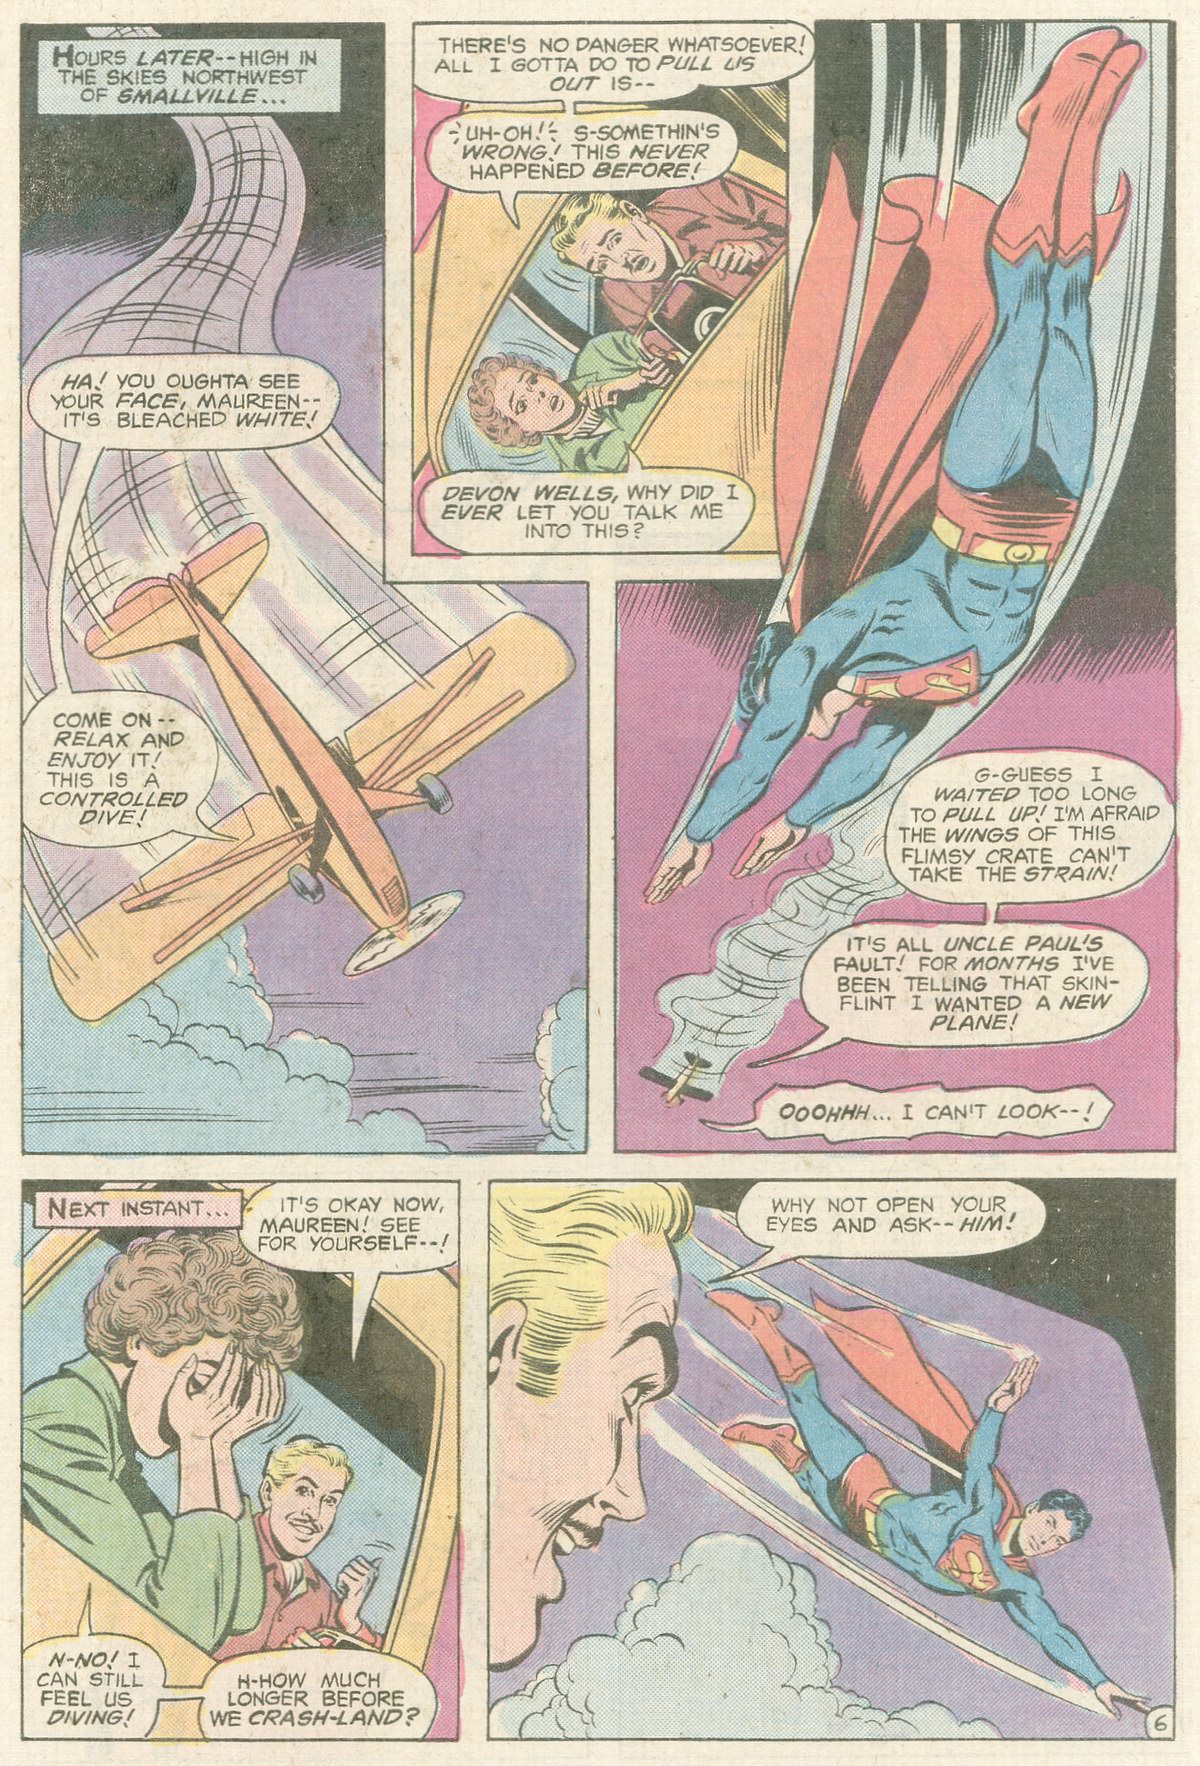 The New Adventures of Superboy 12 Page 6